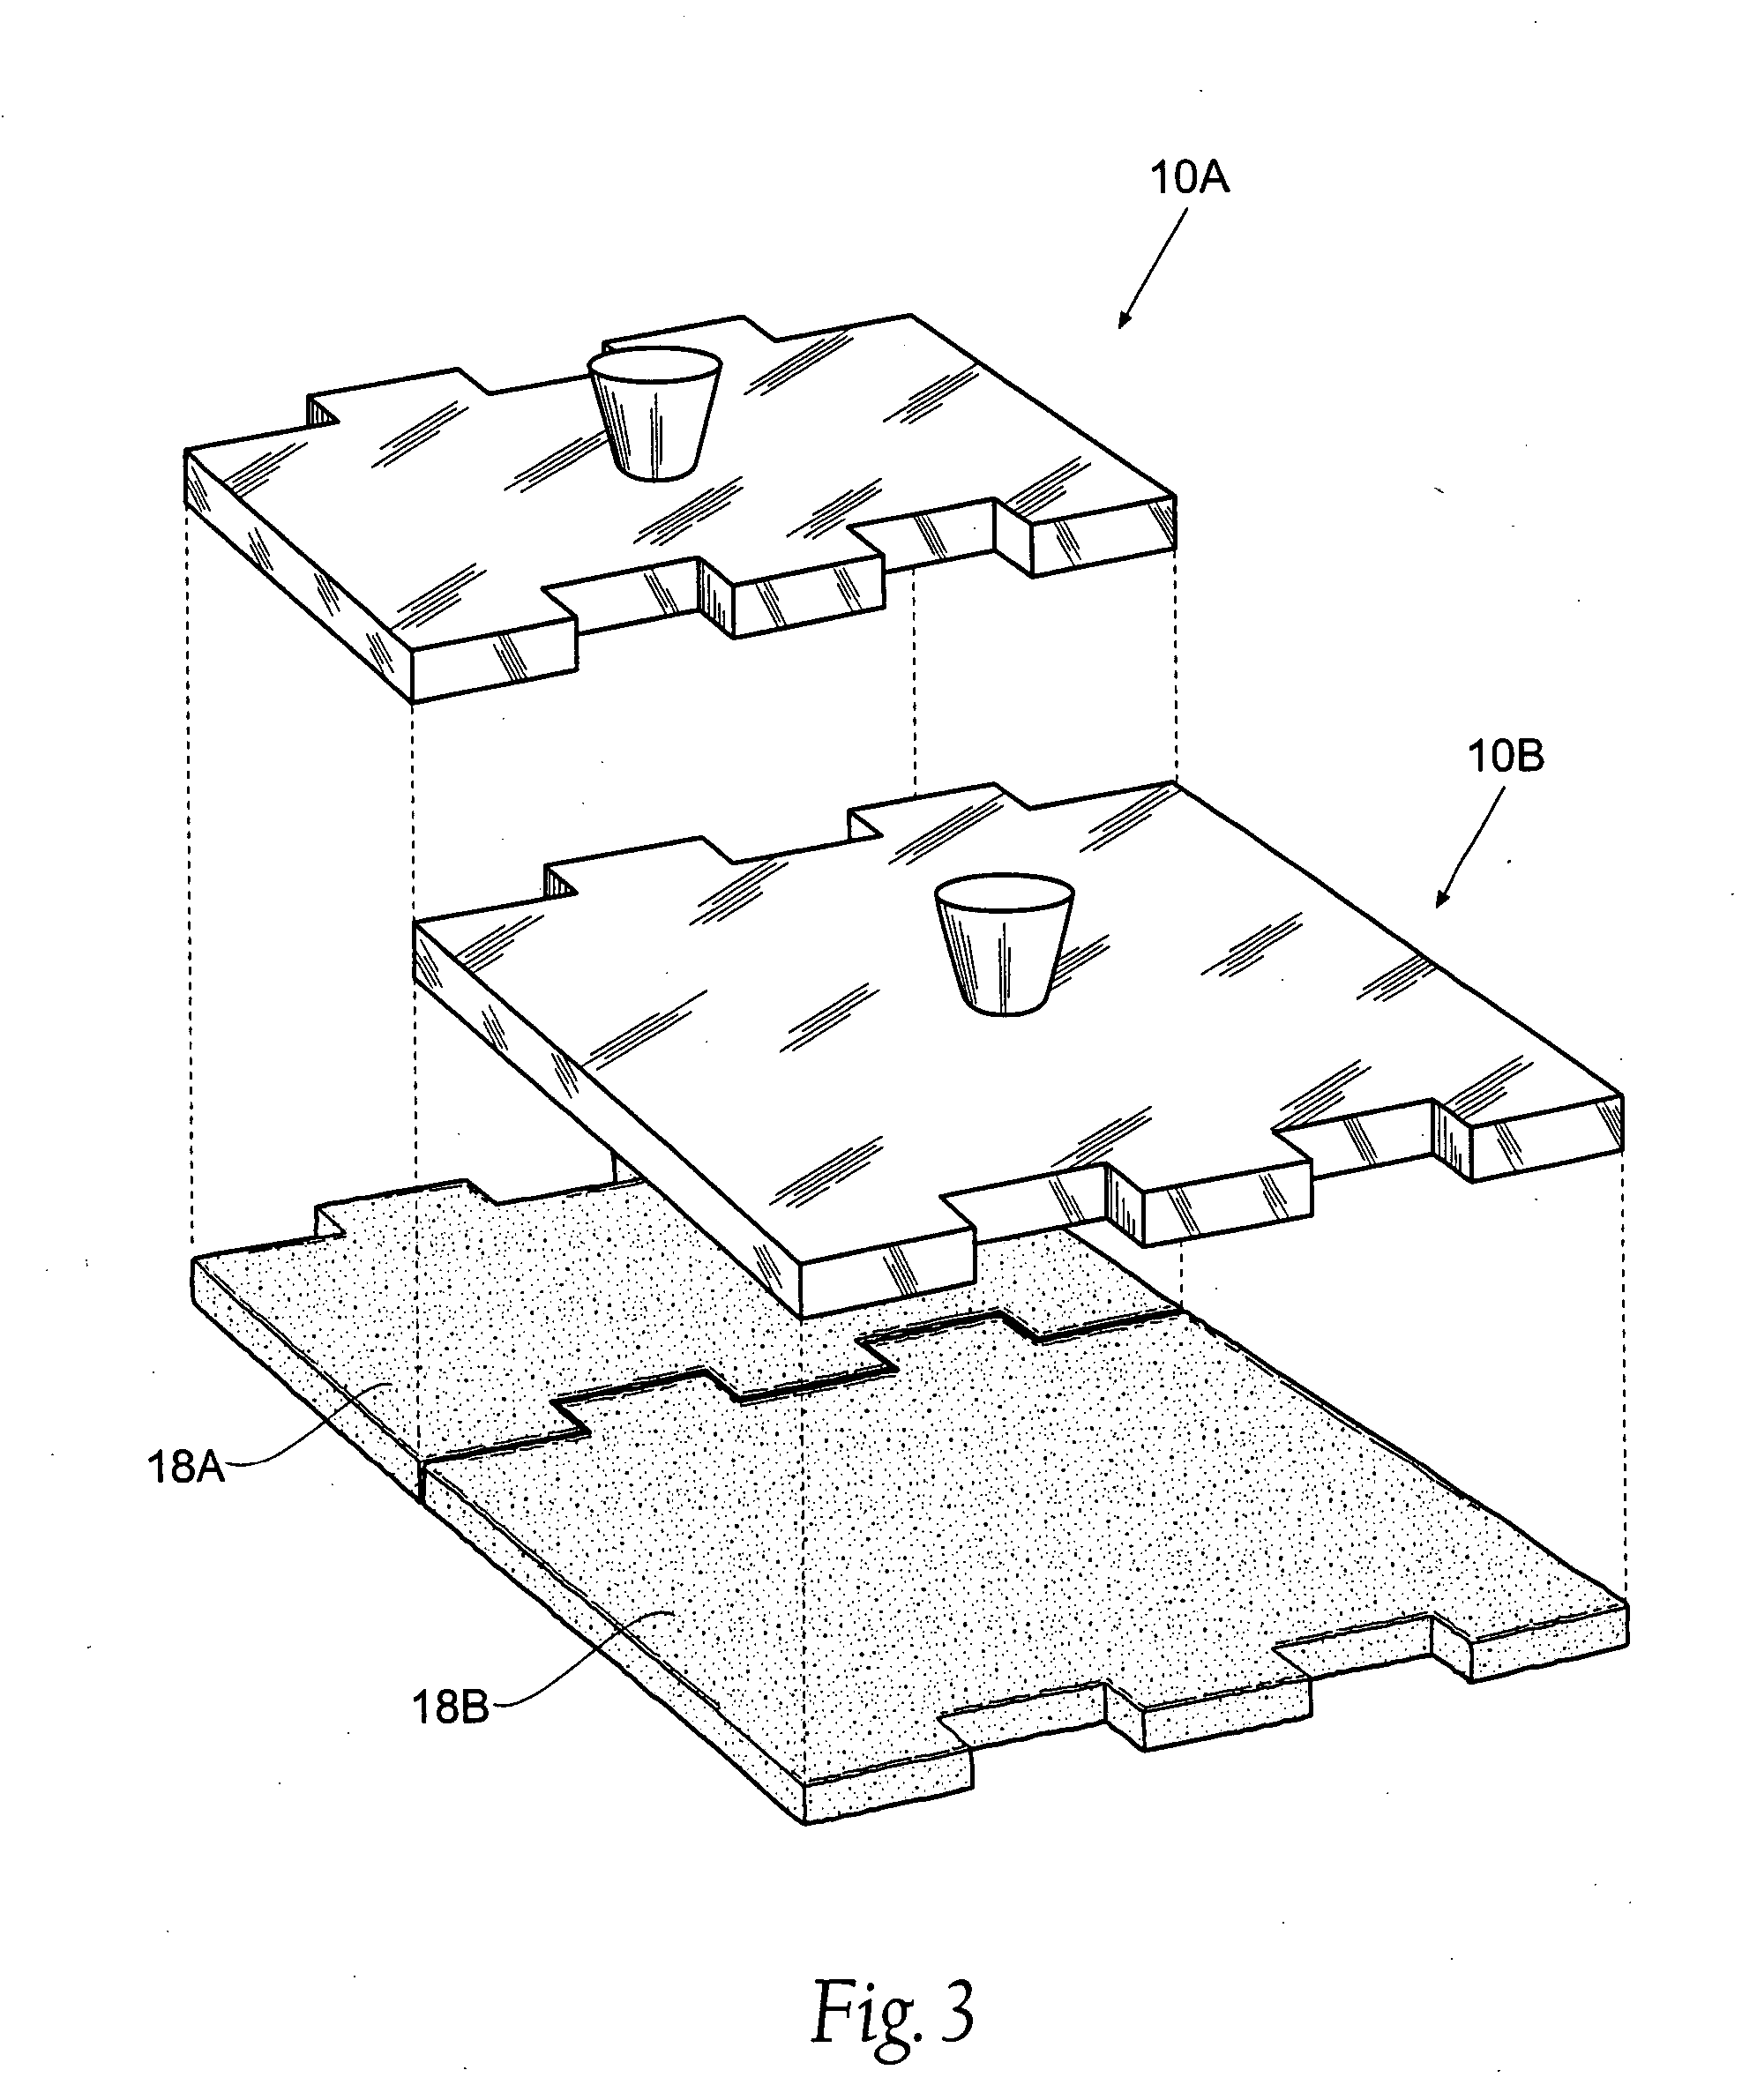 Systems and methods for building an interlocking decorative house